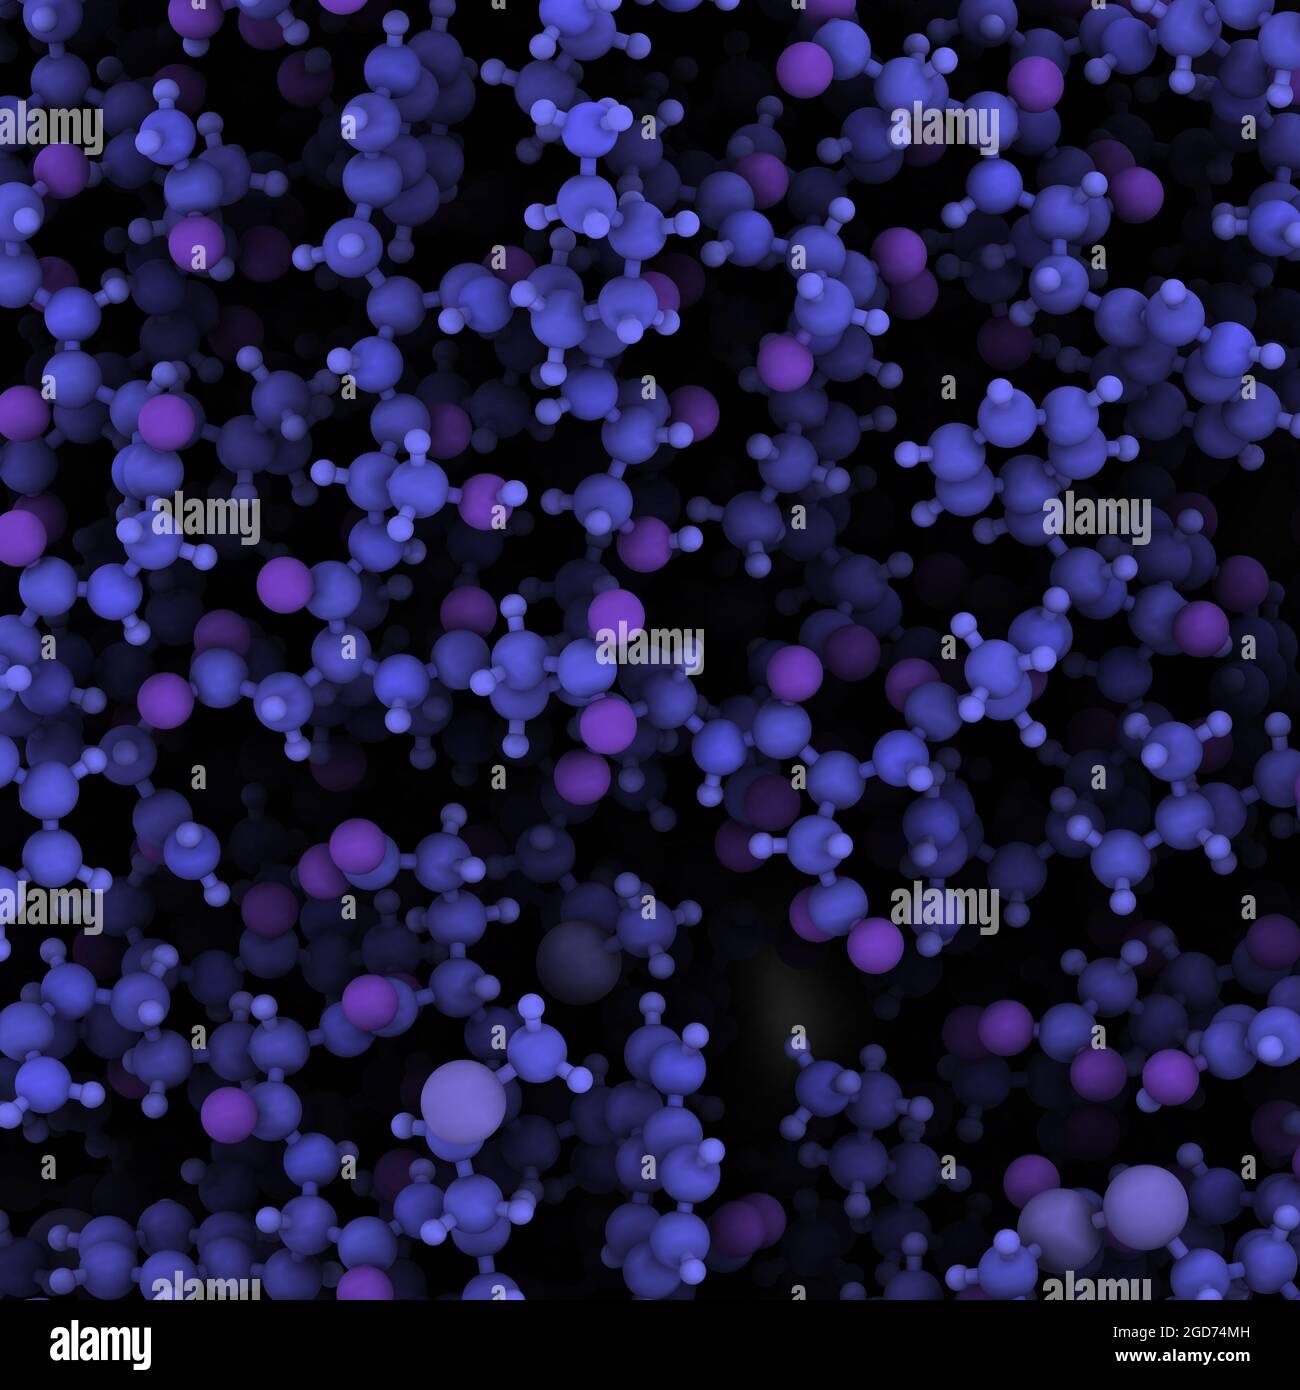 Atomic-level detail view of the protein alpha-galactosidase (Agalsidase). 3D render. Stock Photo